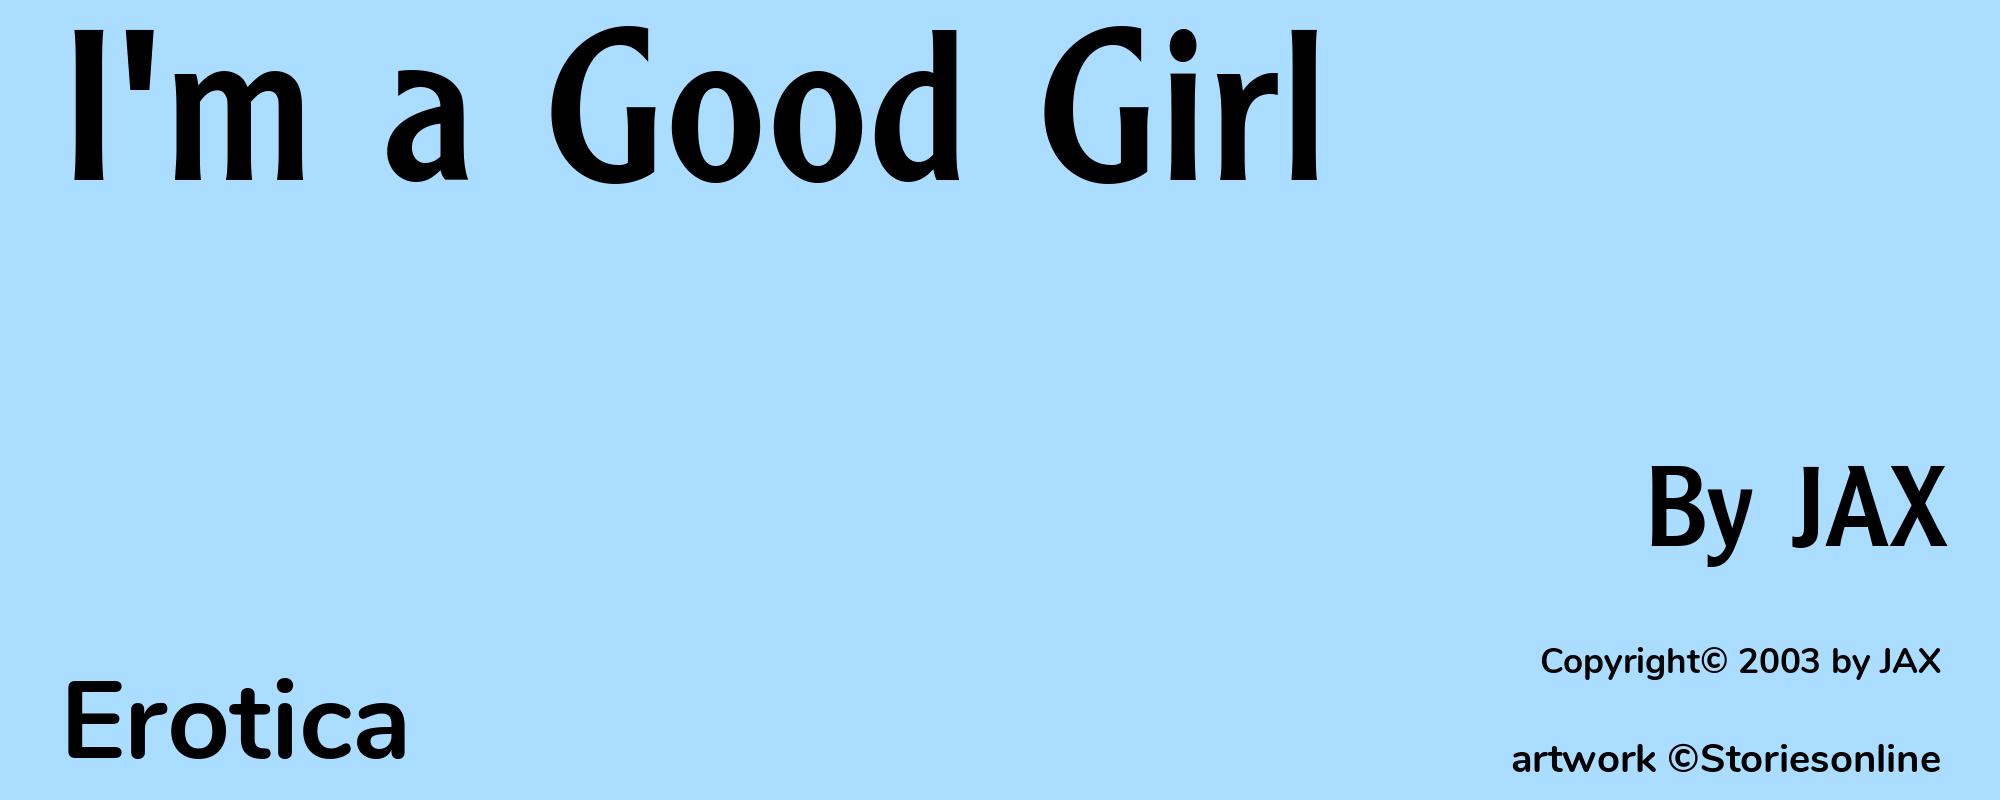 I'm a Good Girl - Cover